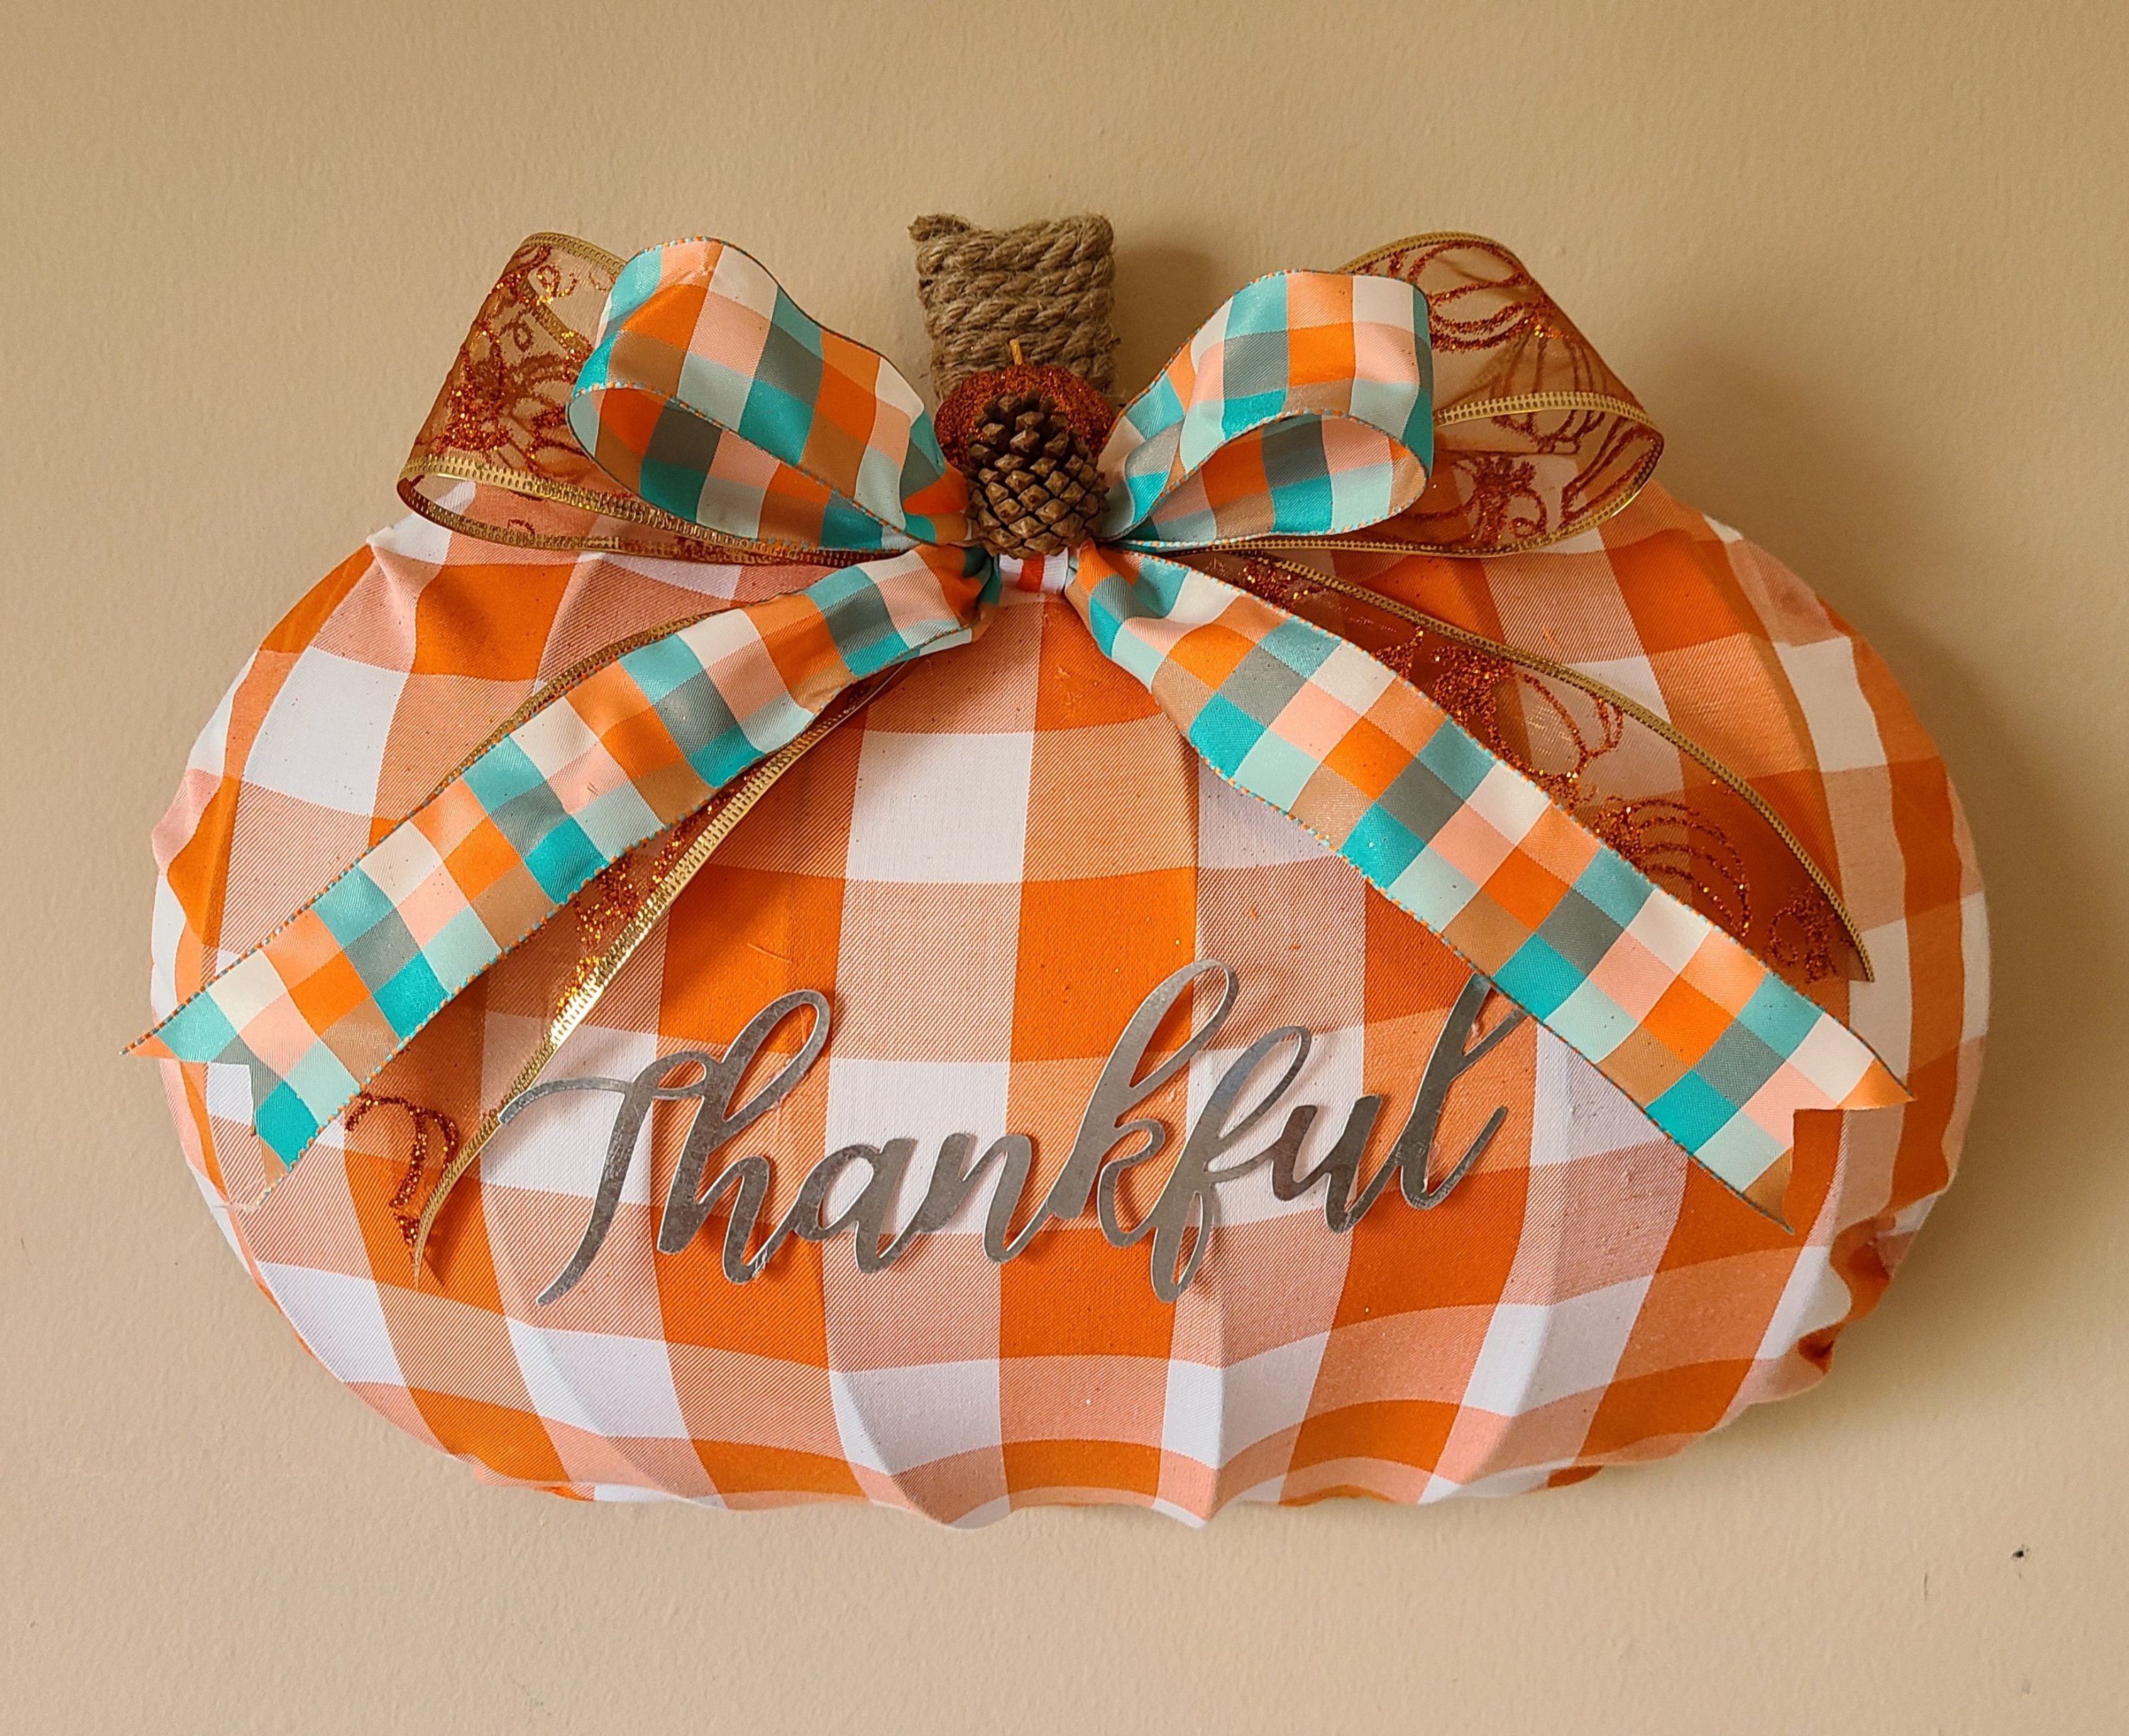 Dollar Tree pumpkin wreath form covered with orange and white buffalo check fabric, galvanized metal "Thankful" in the center, nautical rope wrapped around the top to create a stem, and a teal, orange, & white bow on top of orange and gold glitter ribbon bow.